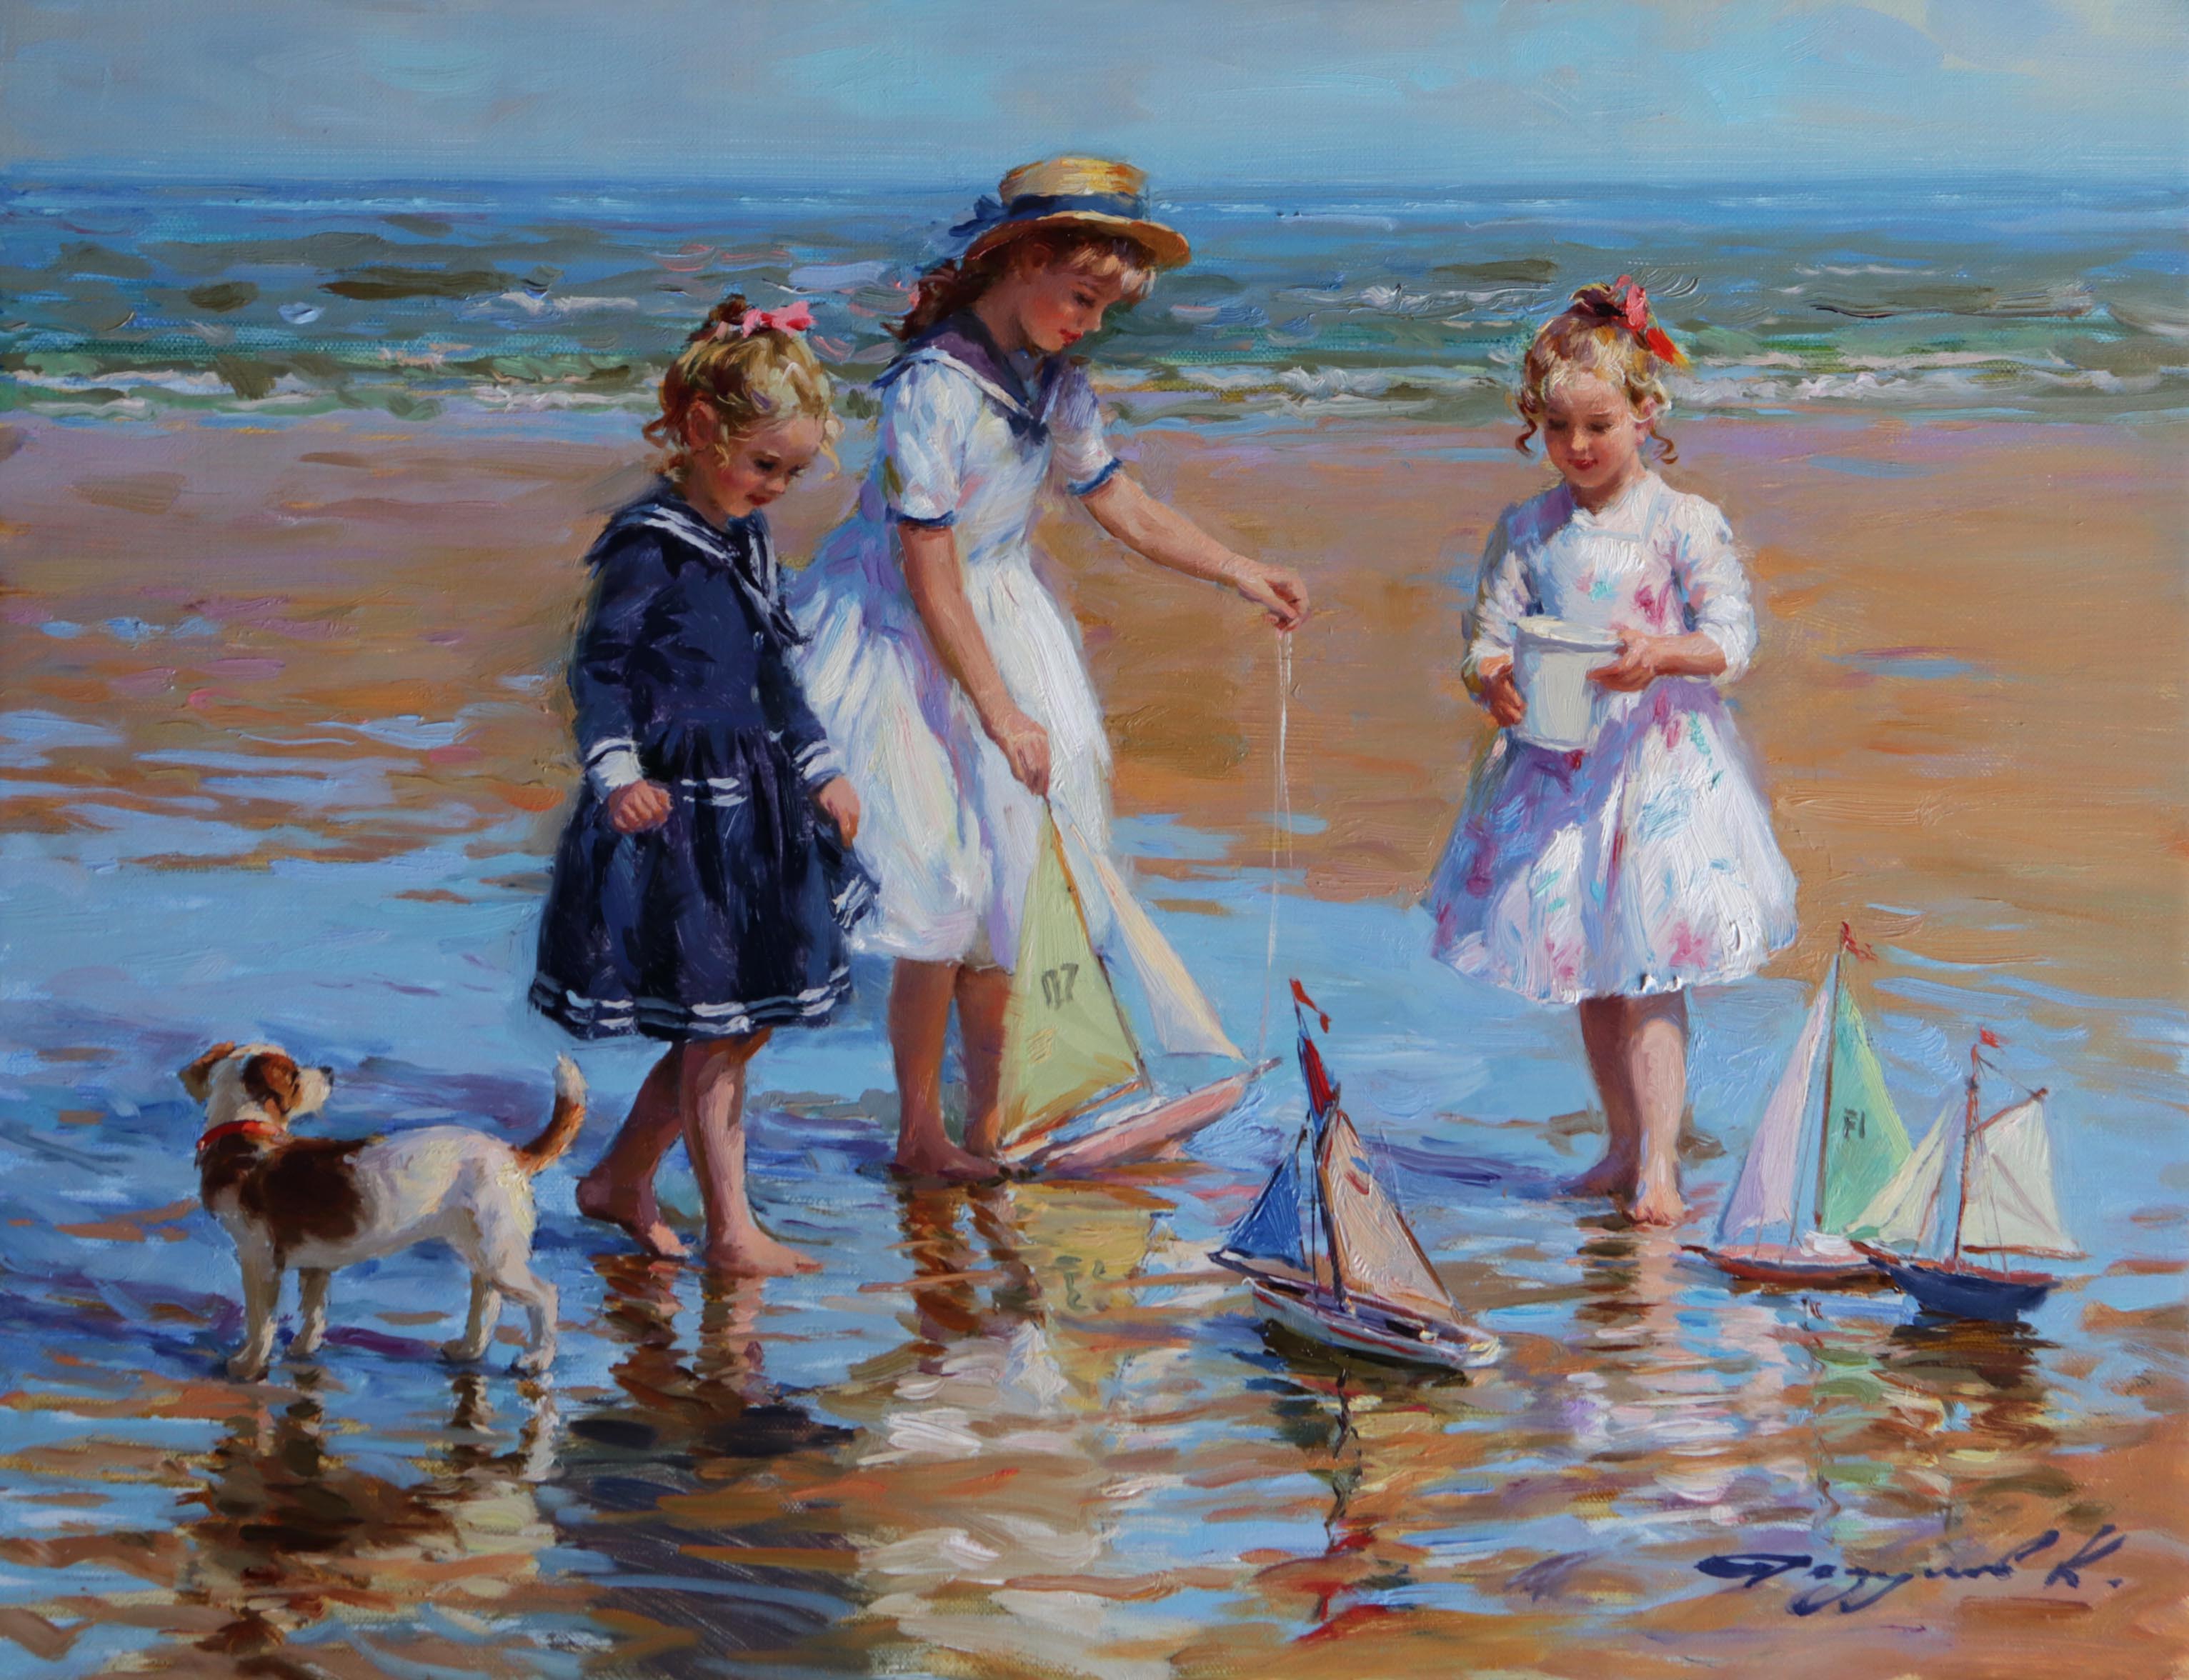 Konstantin Razumov (1974- ) Russian. "On the Seashore", Children and a Dog playing on the Beach with